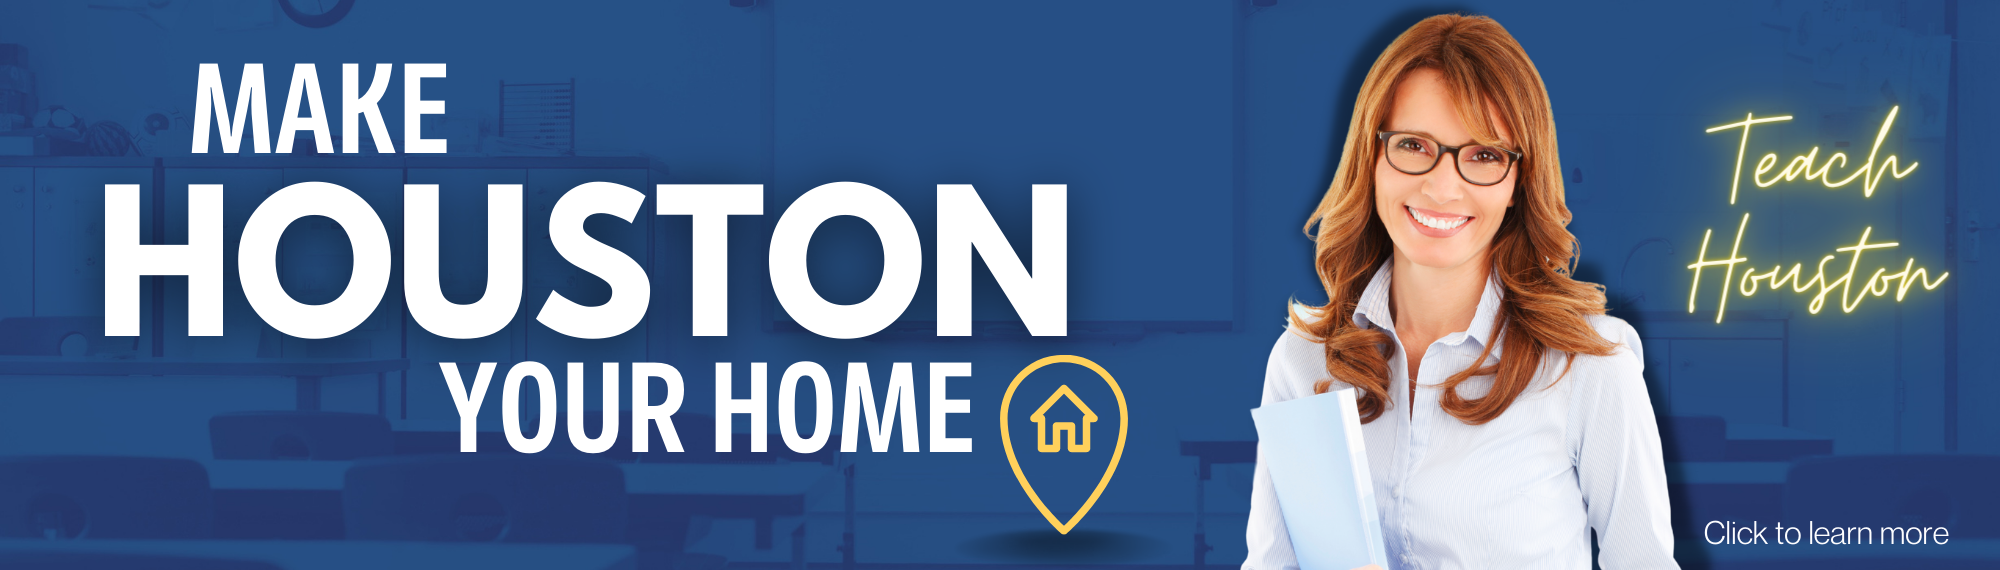 Make Houston Your Home.  Teach Houston! Click to learn more.